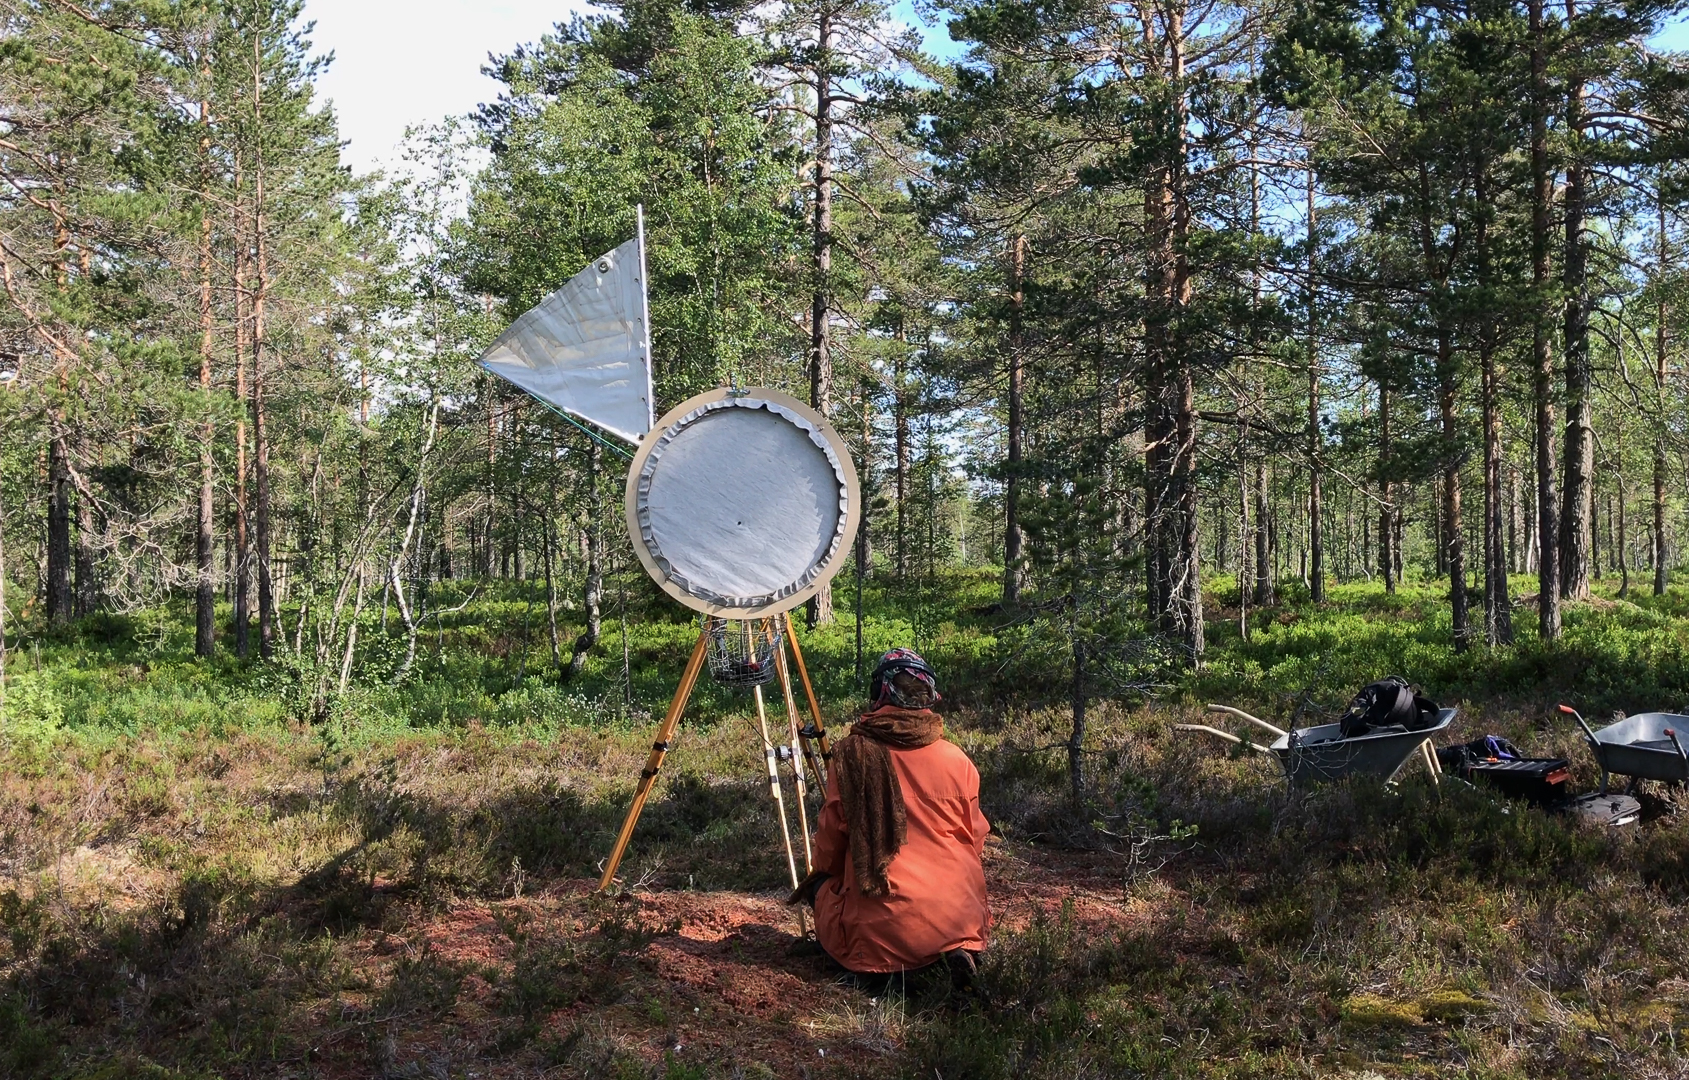 Photo of forest landscape. A person in orange clothes sitting on the ground in front of an aparatus with a circle and a triangle.